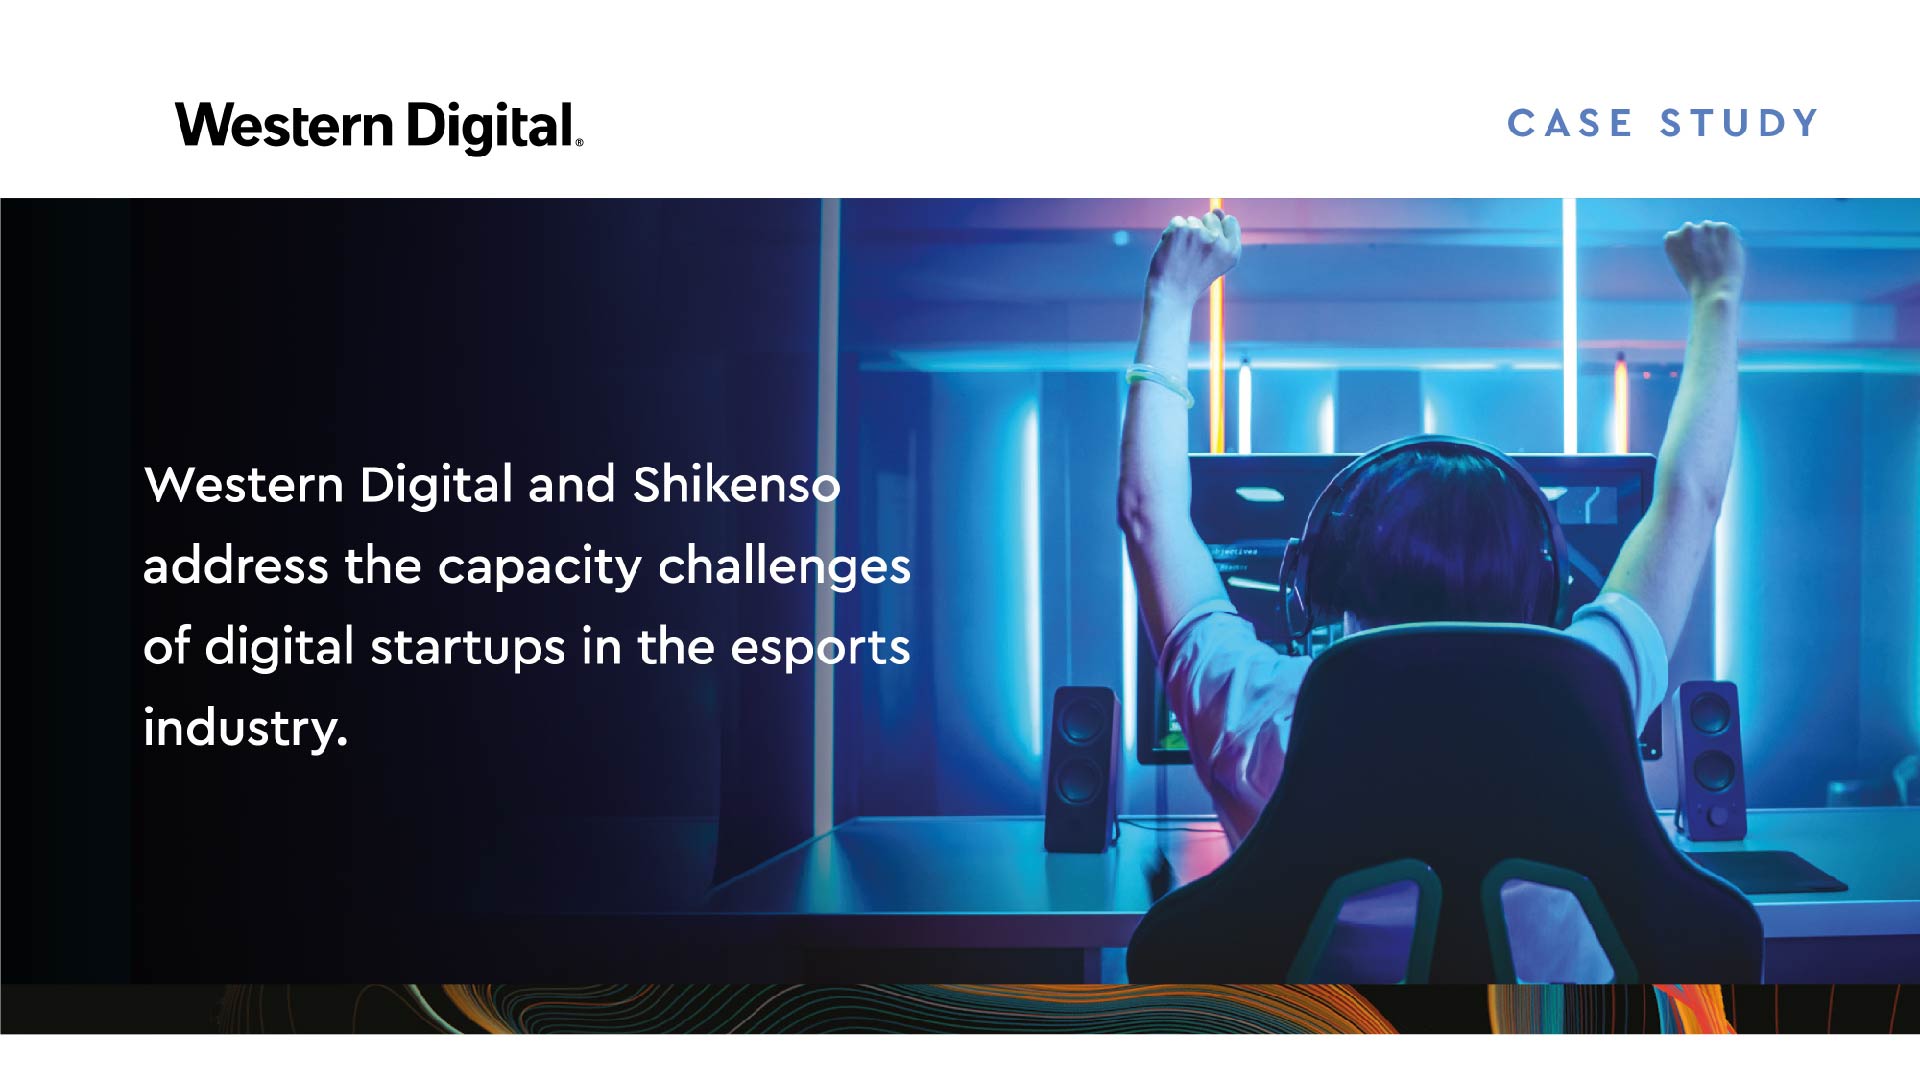 Case Study: Western Digital and Analytics Startup Shikenso address the capacity challenges of digital startups in the esports industry.